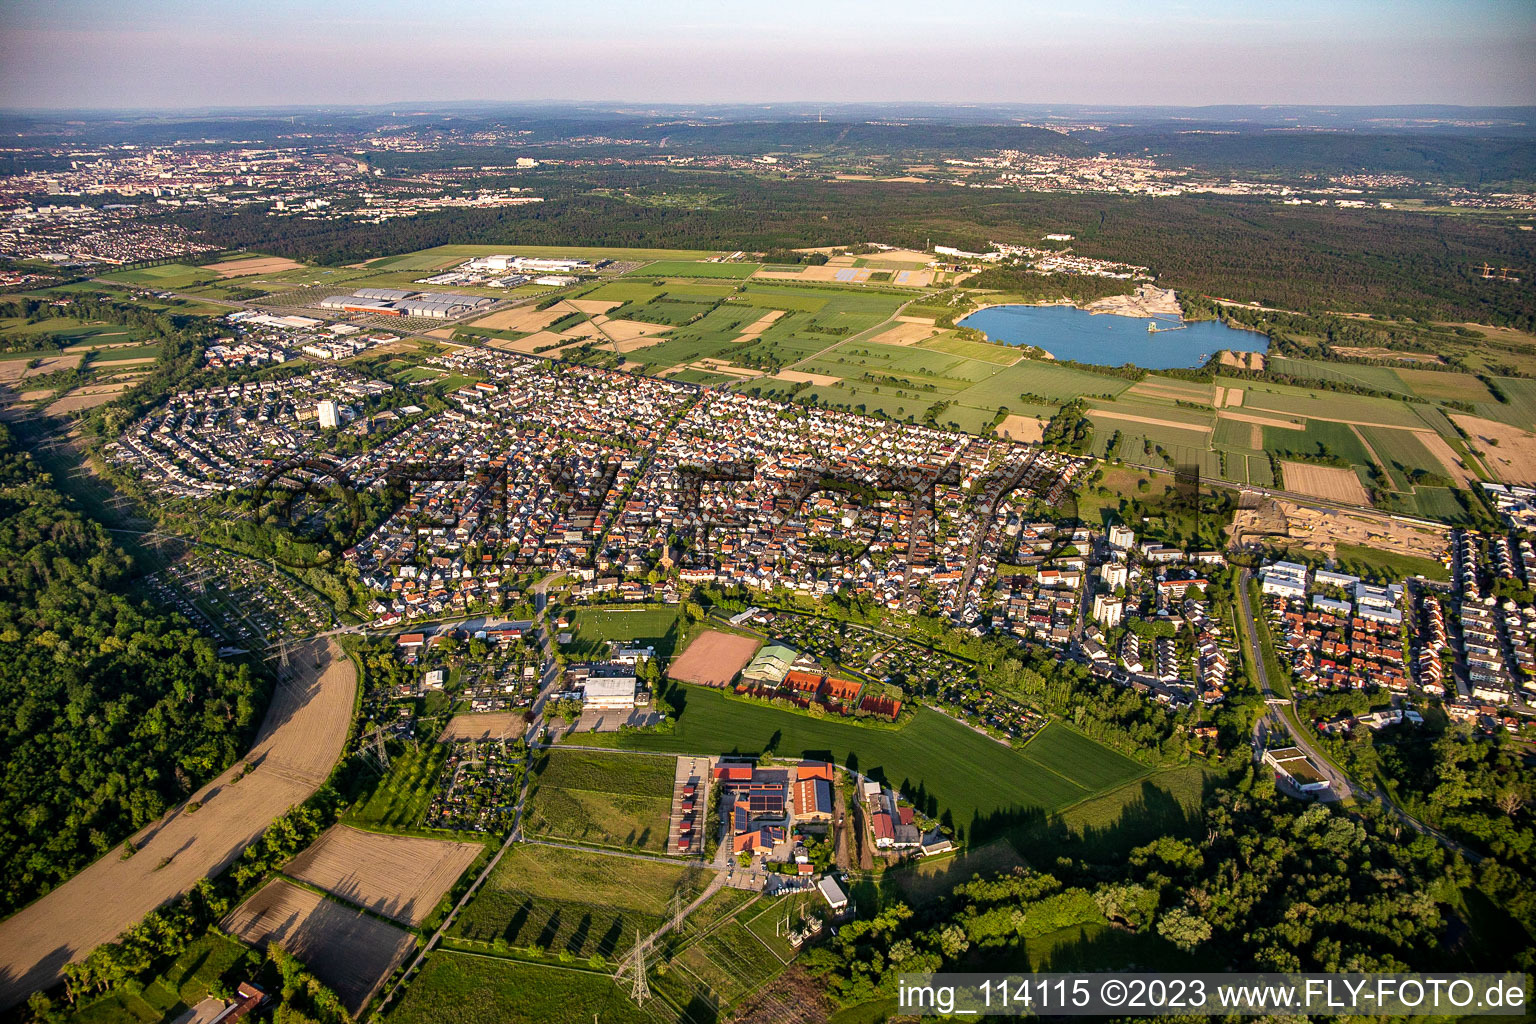 Aerial view of From the west in the district Forchheim in Rheinstetten in the state Baden-Wuerttemberg, Germany